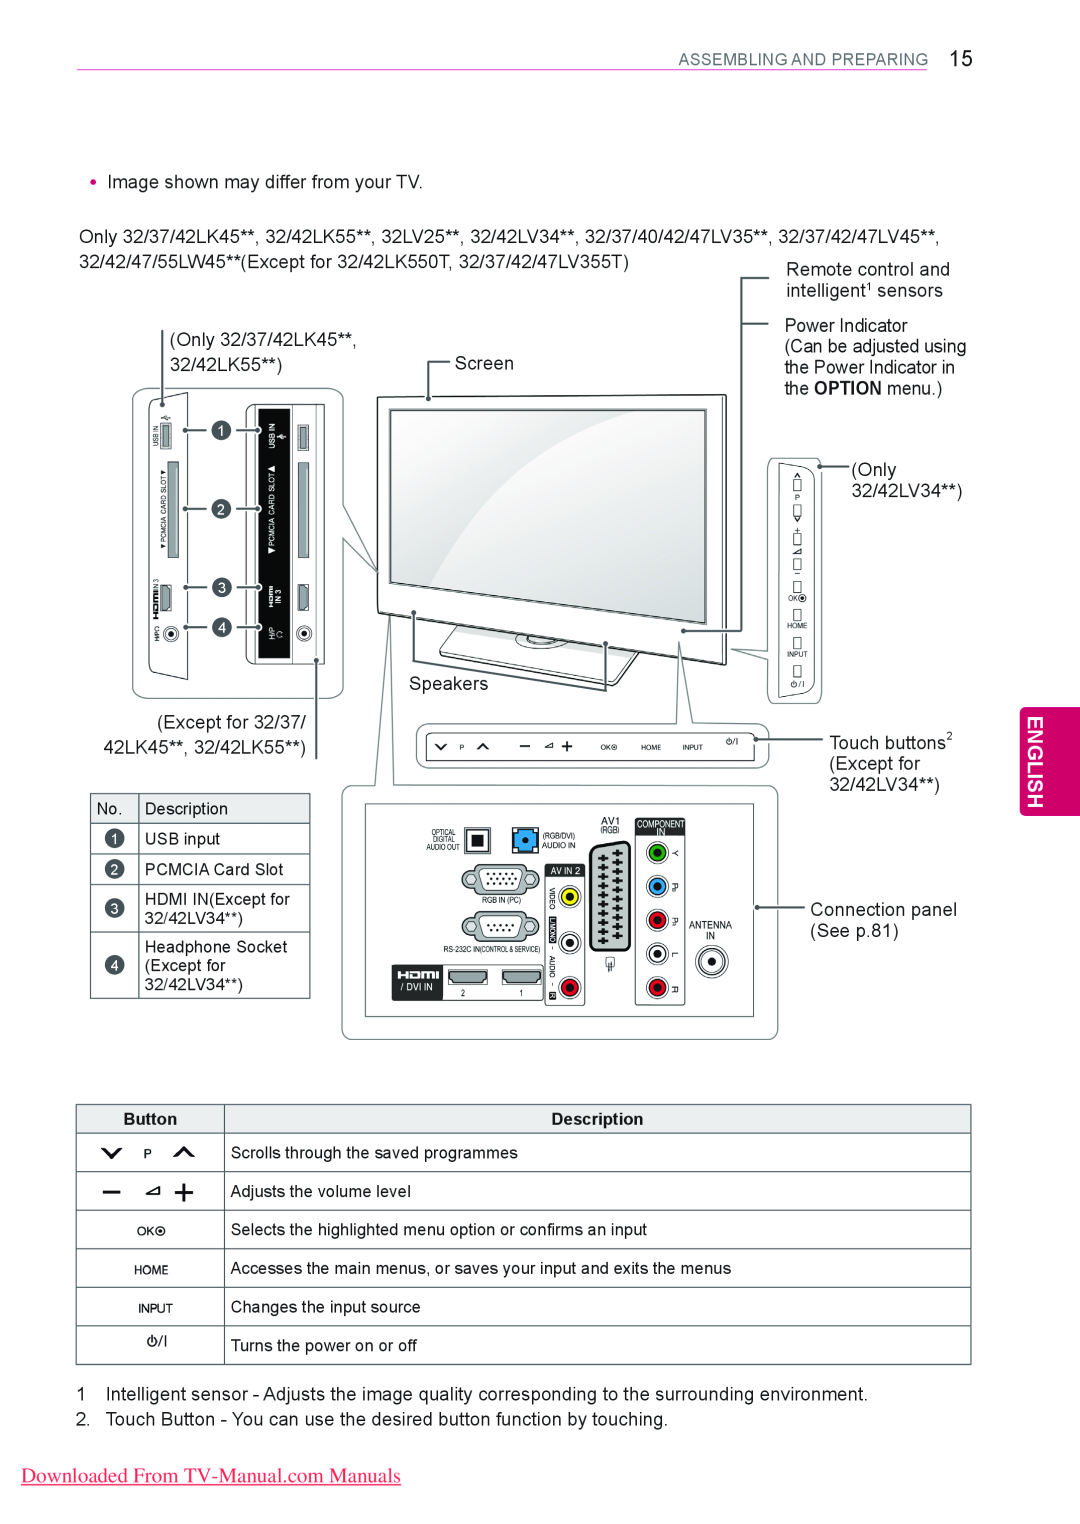 LG Electronics 60PV25**, 50/60PZ55**, 50/60PZ25**, 42PT25**, 42/50PW45** English, Downloaded From TV-Manual.com Manuals 